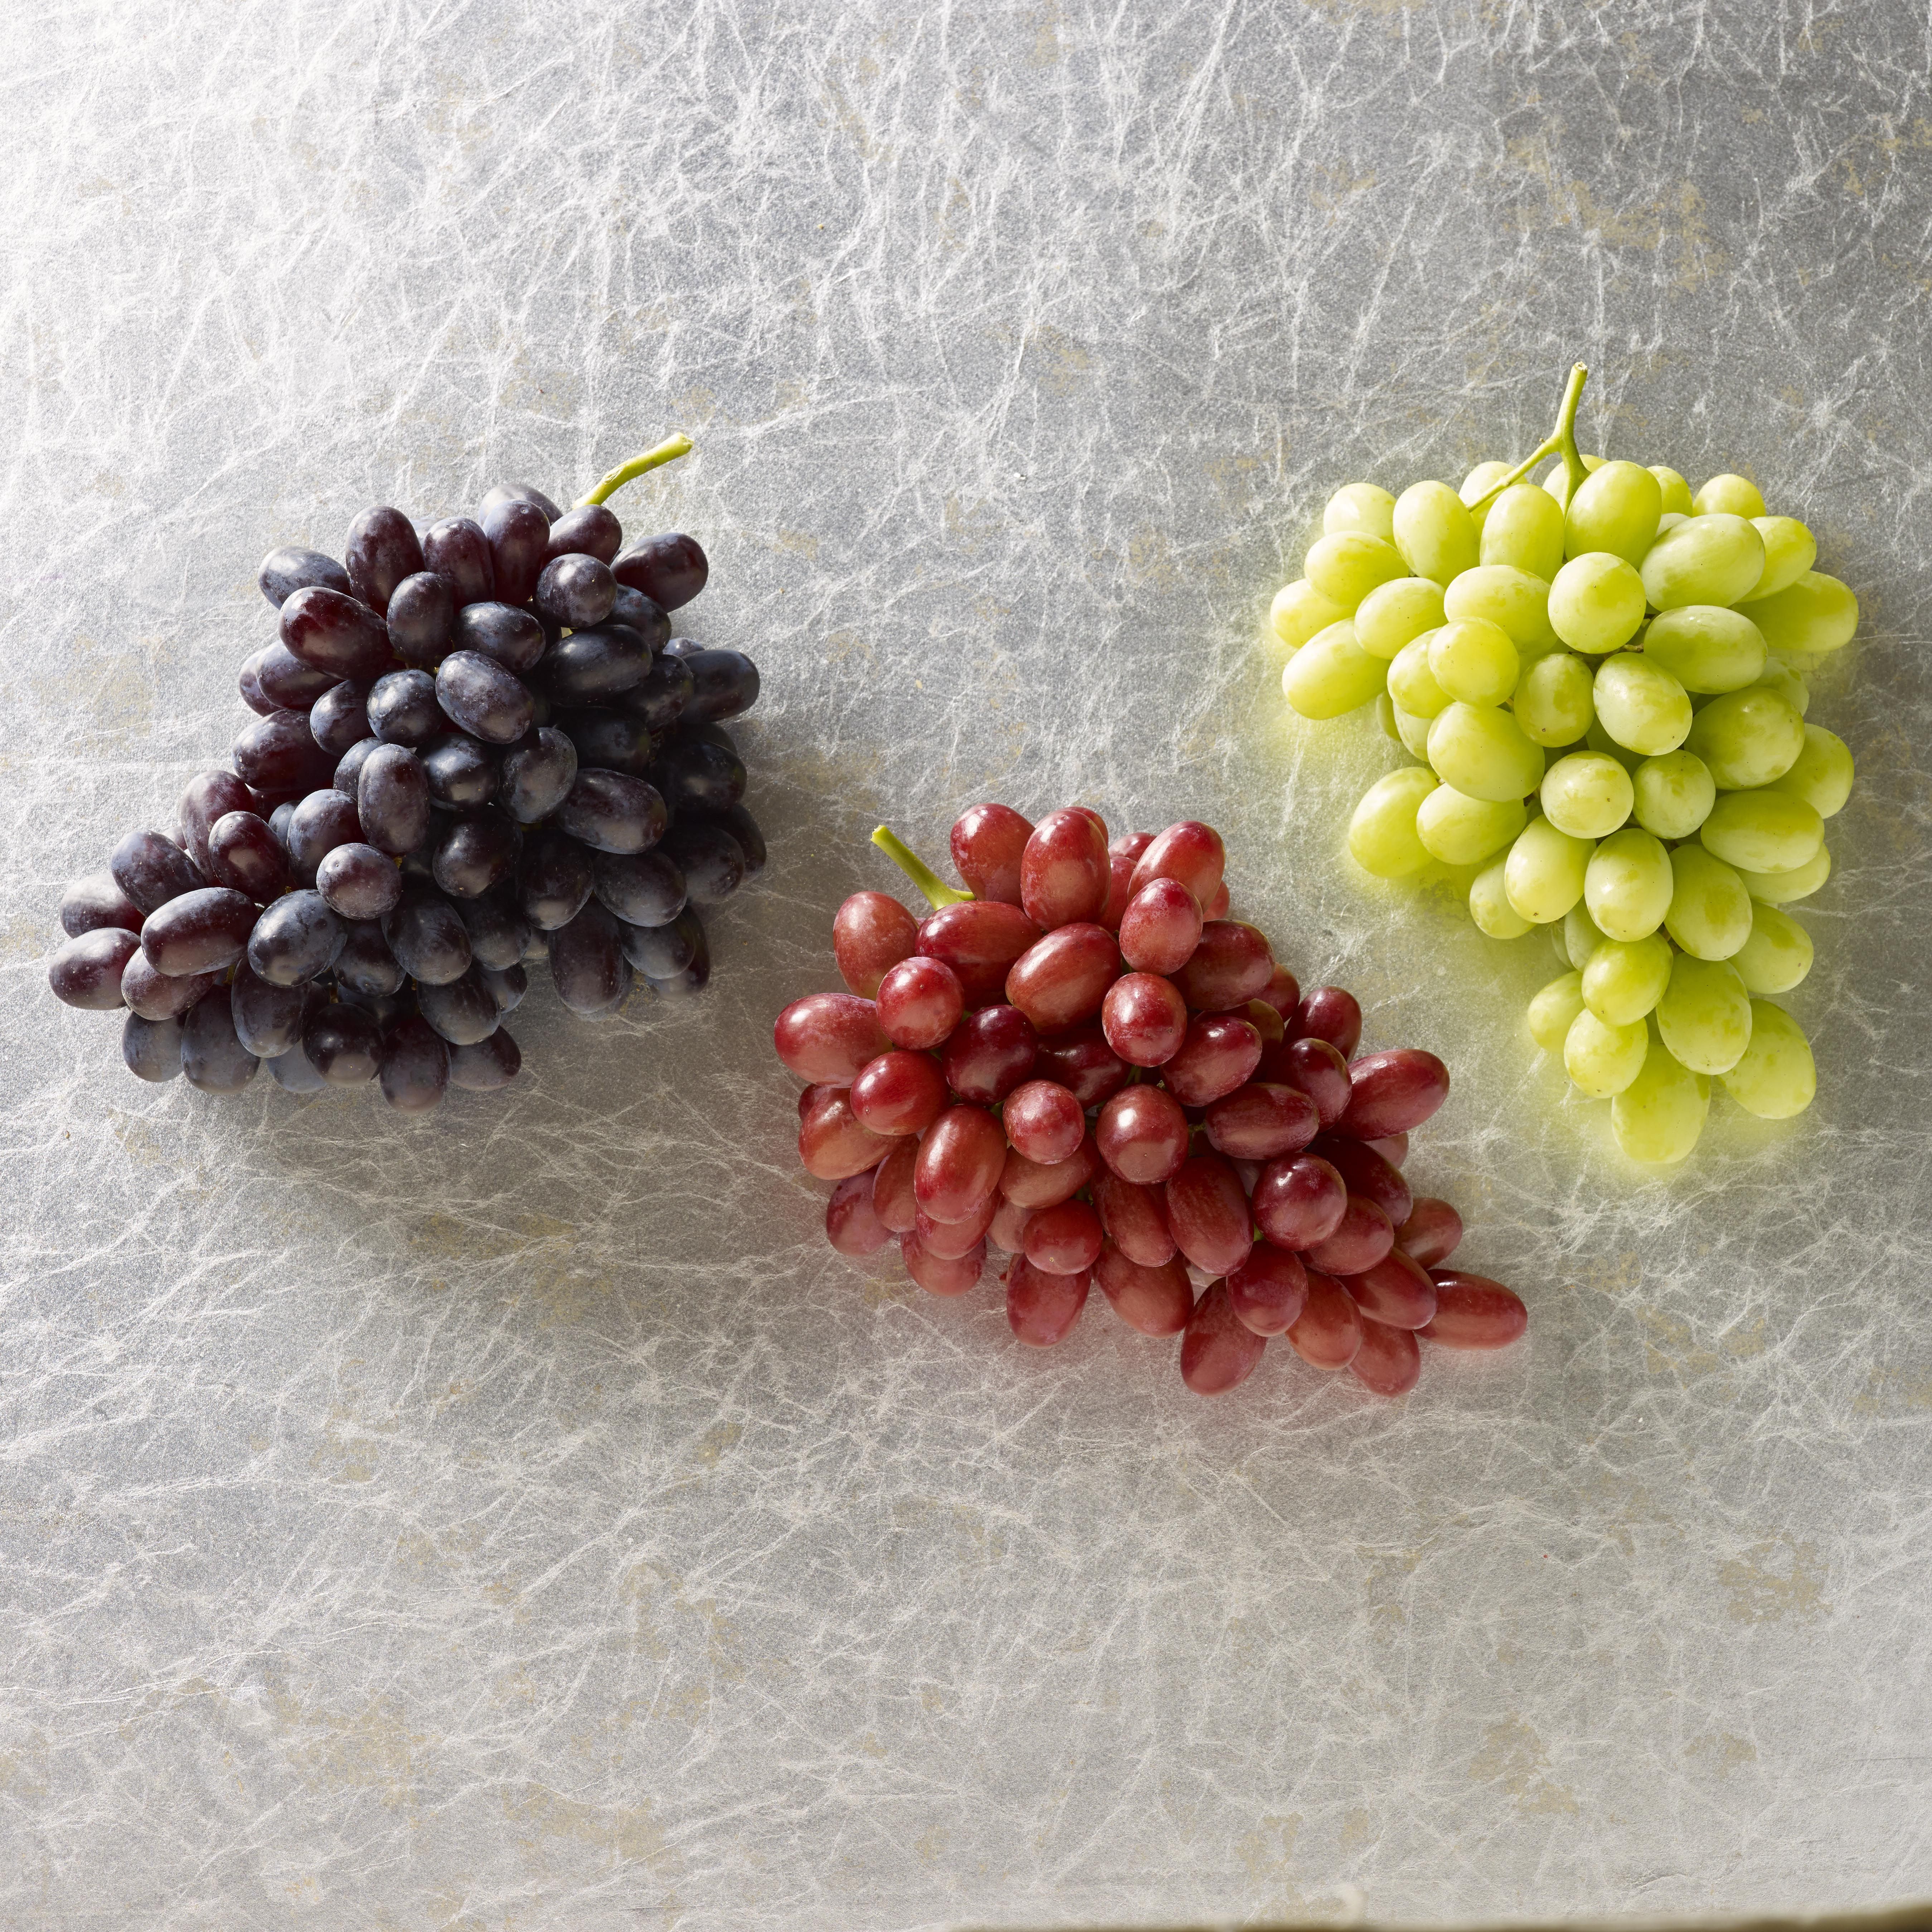 7 Health of Grapes - Are Red and Green Grapes Good for You?